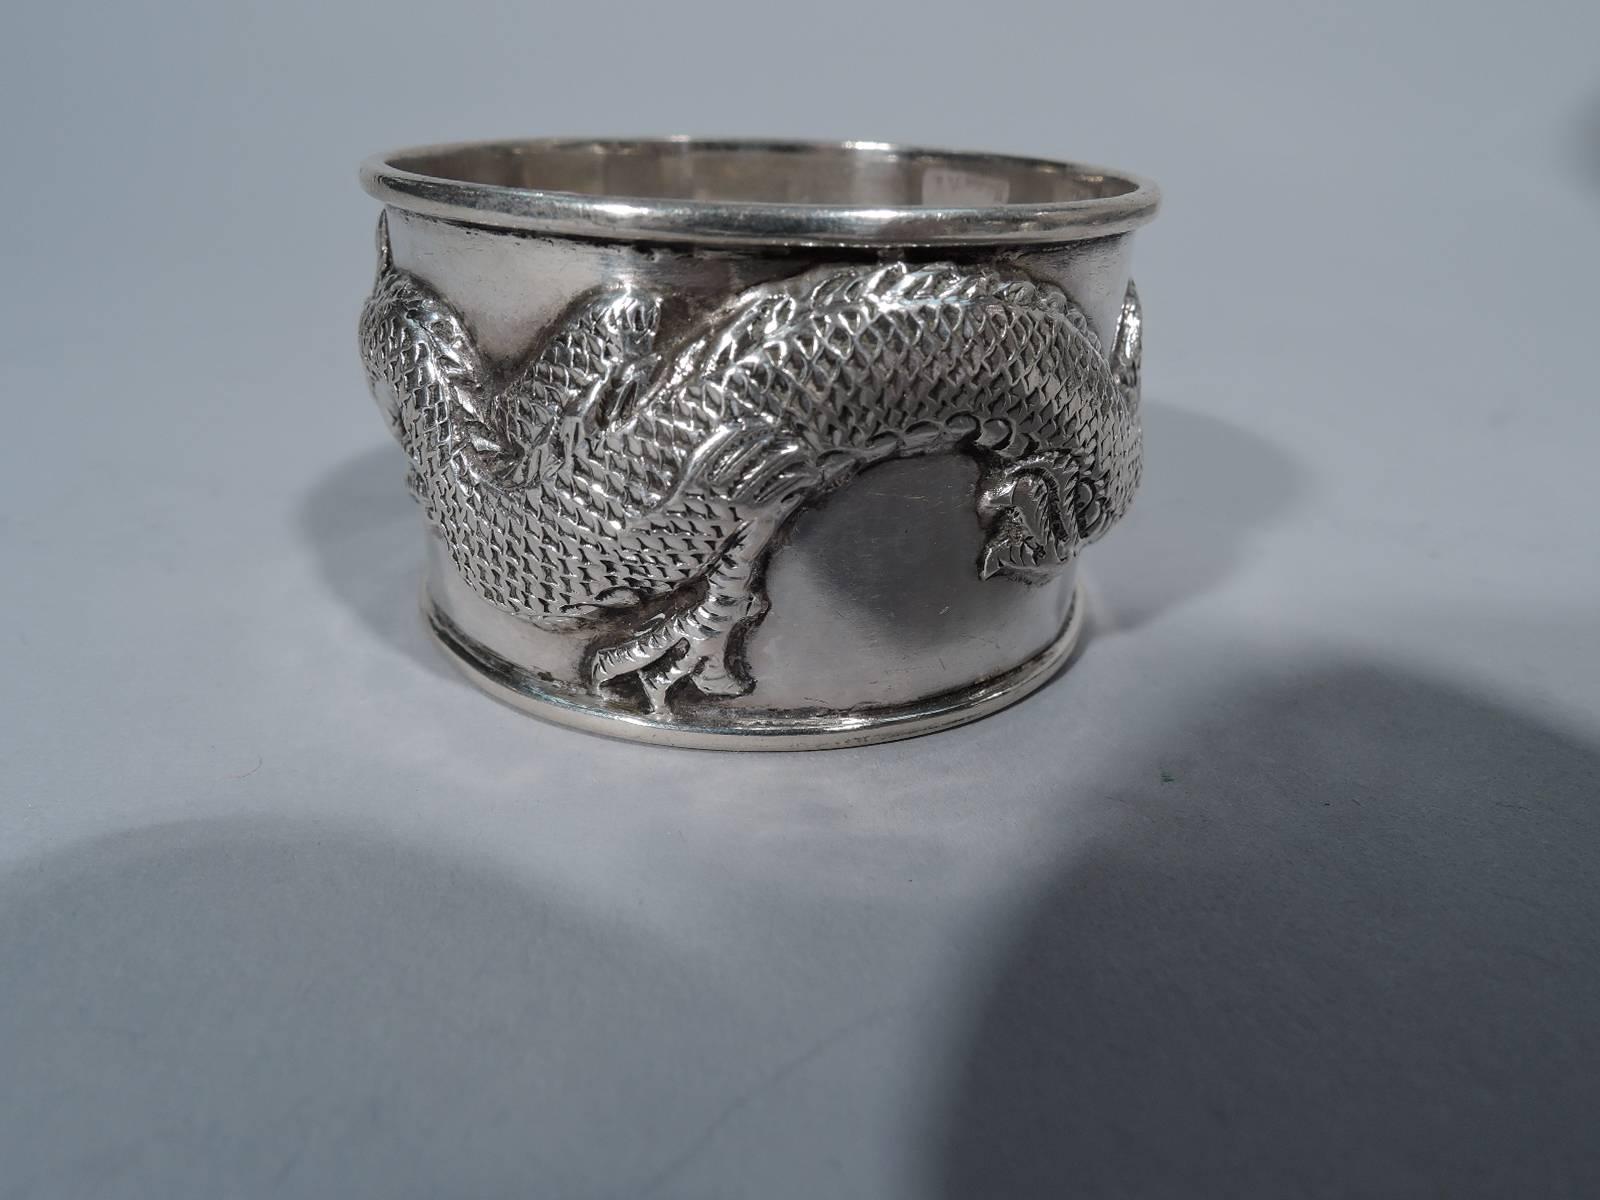 Chinese export silver napkin ring with applied wraparound dragon a scaly, slithering beast. Room for engraving between the snout and tail. Hallmarked Wang Hing, a Hong Kong maker active at the turn of the century. Excellent quality and